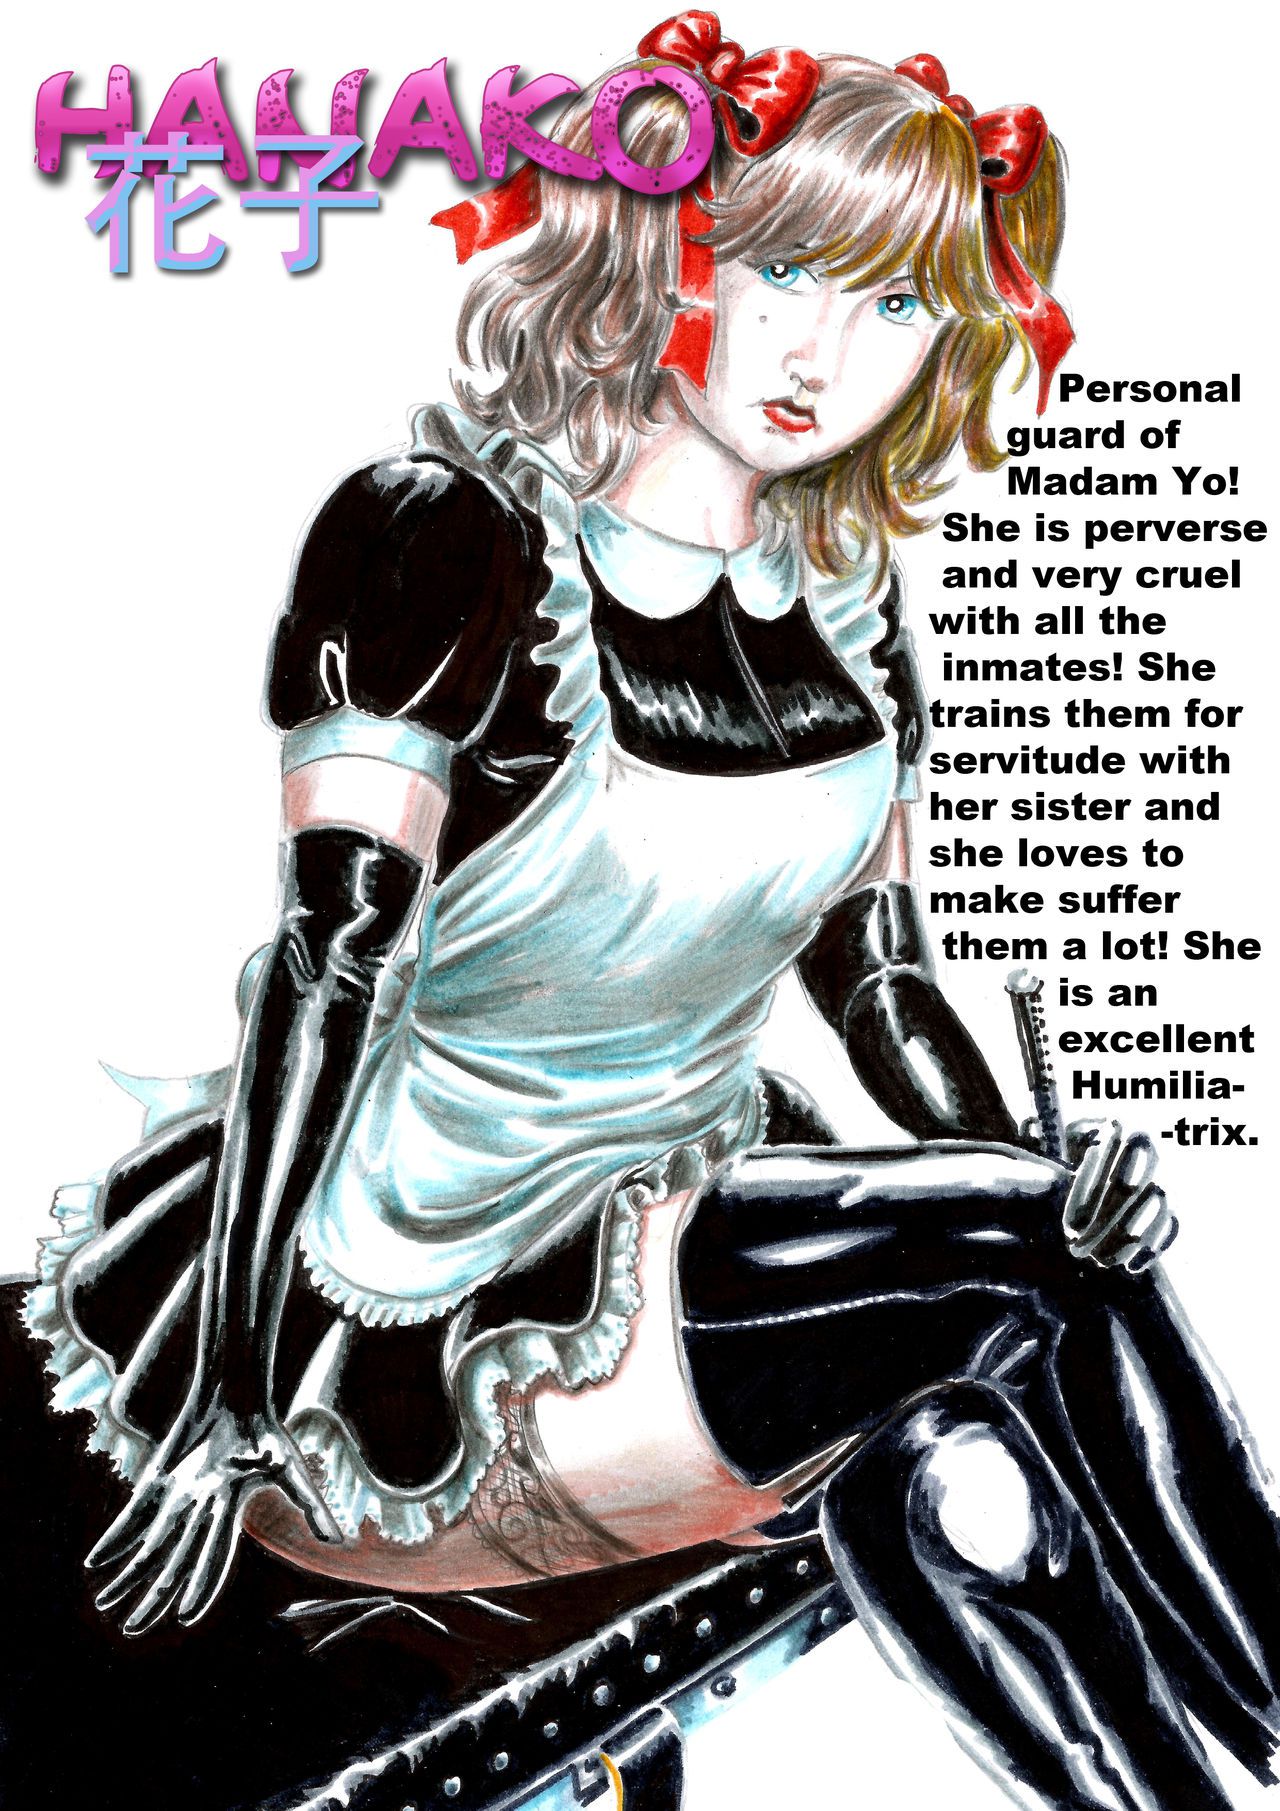 The Fortresse of Madam Yo Characters presentation for my comic book マダム・ヨーヨーの要塞 3